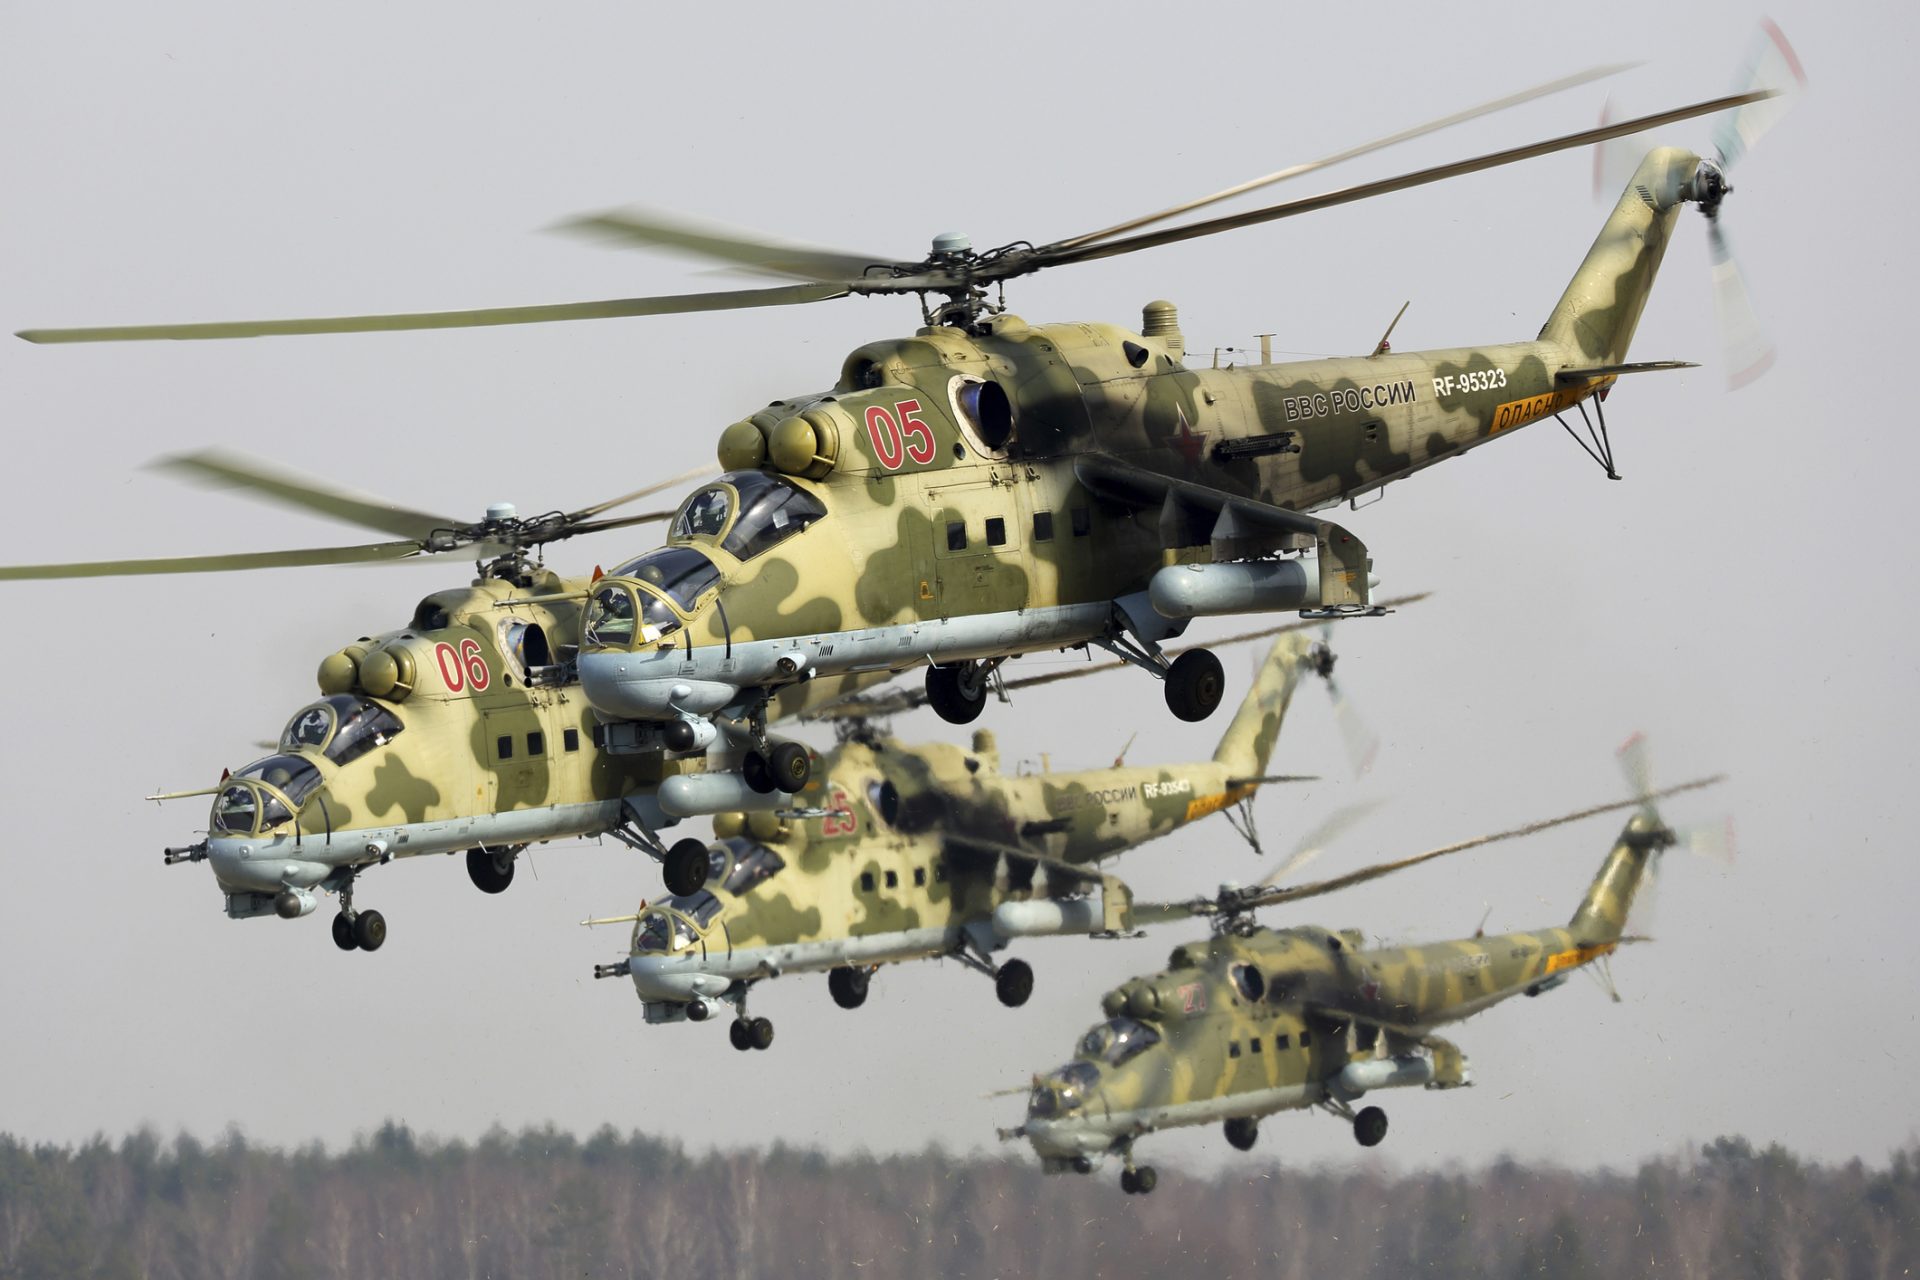 How did the helicopters get to Taganrog?